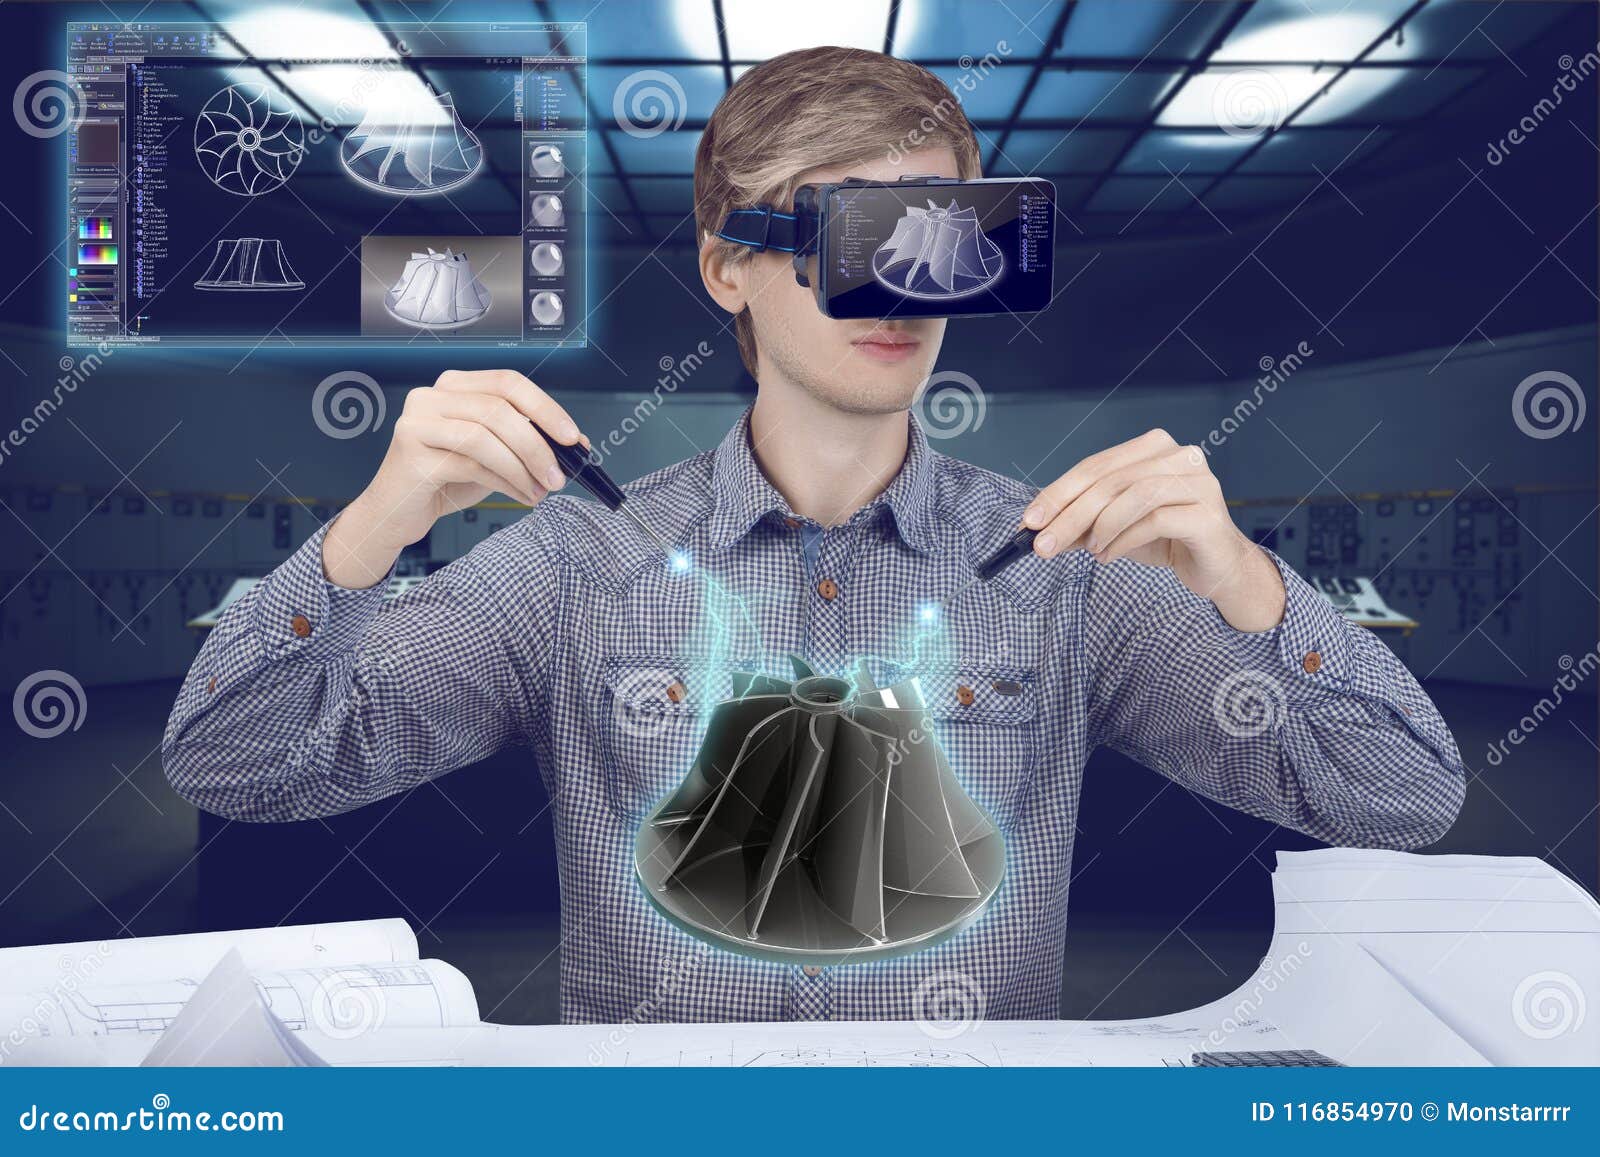 Virtual Reality in Engineering Concept Stock Photo - of engineer, analyzing: 116854970